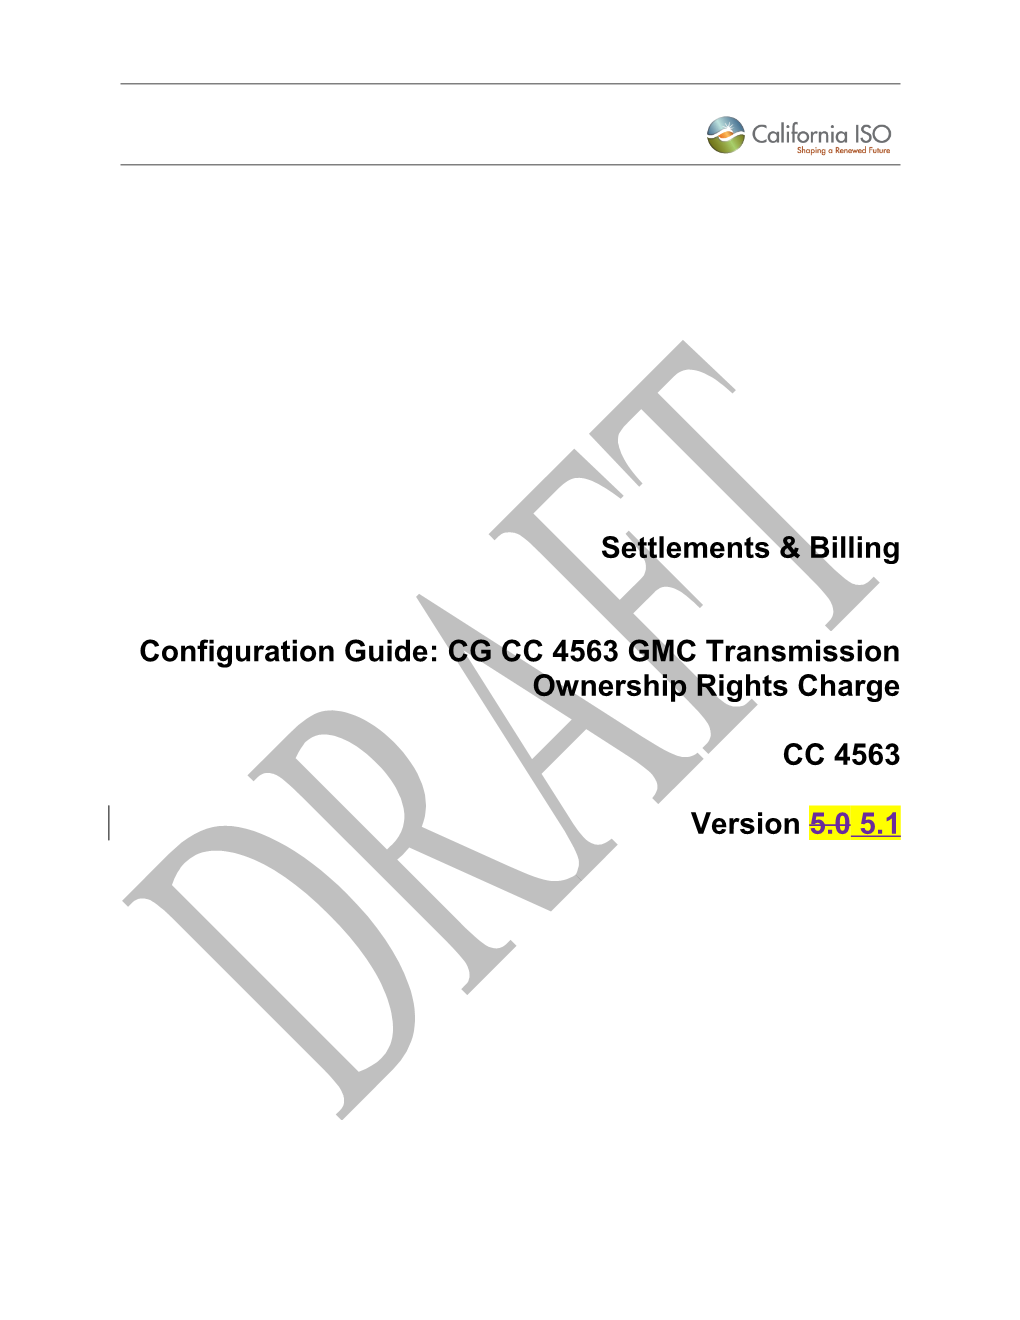 CG CC 4563 GMC Transmission Ownership Rights Charge